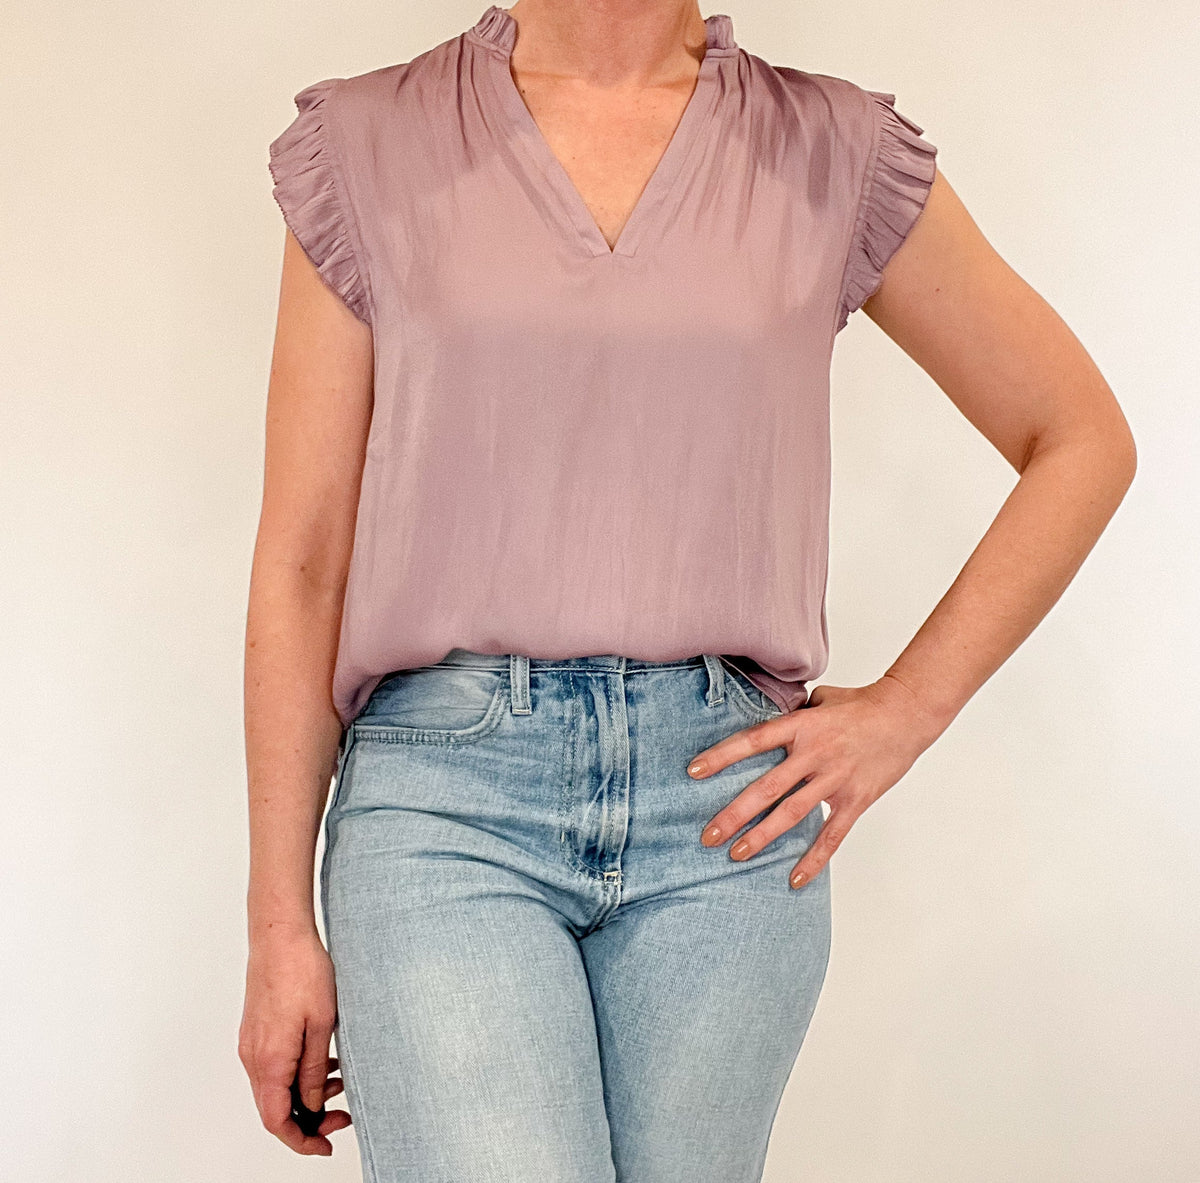 Indulge in luxurious style with our Satin Ruffle Sleeve Blouse. Crafted from lightweight satin fabric, it comes in two soft and feminine colors - lavender and peach. The v-neck and ruffled shoulders add a touch of sophistication to this sleeveless blouse. Elevate your wardrobe with this exclusive piece.